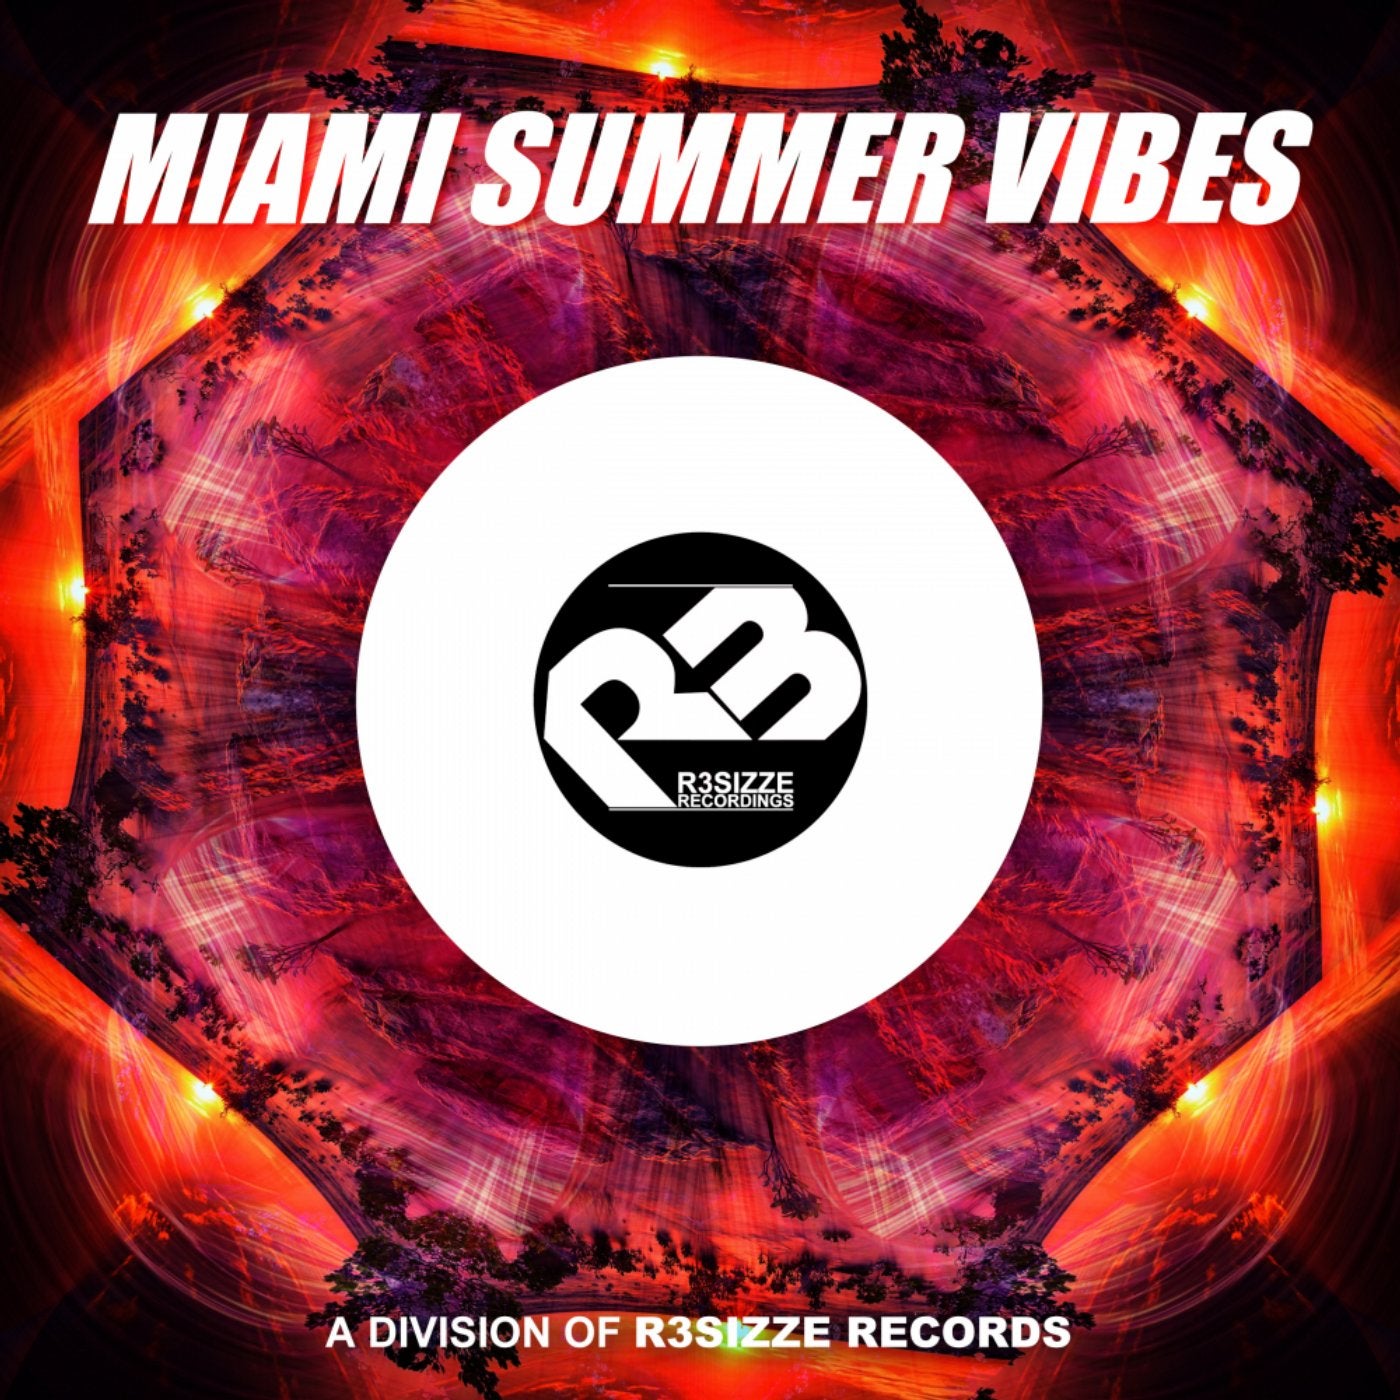 R3sizze Recordings artists & music download - Beatport